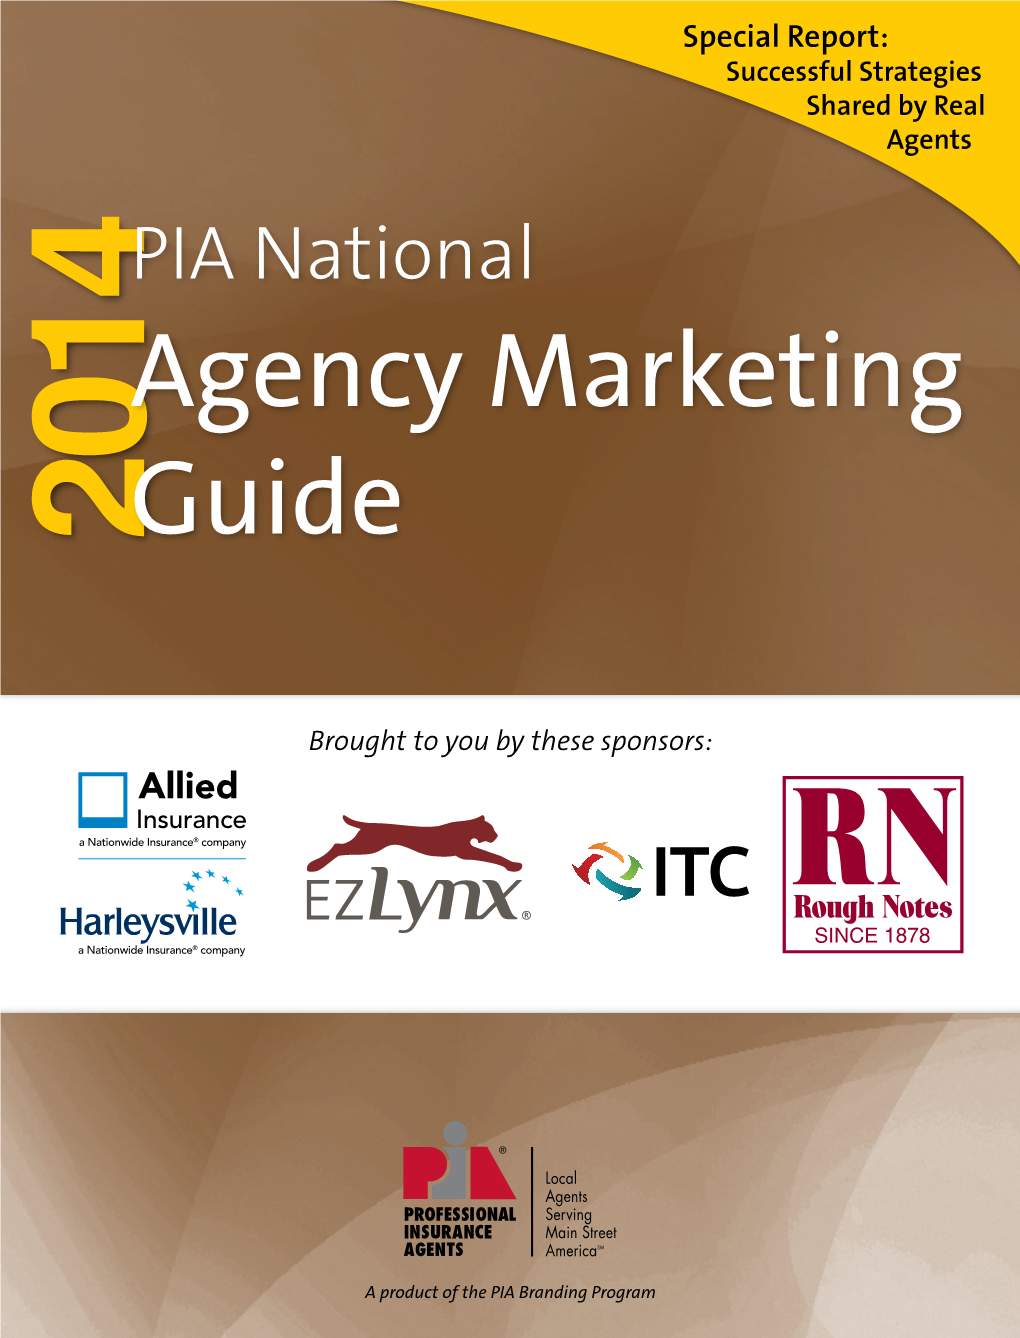 2014 PIA National Agency Marketing Guide: Allied Insurance/Harleysville Insurance, Ezlynx, ITC and Rough Notes